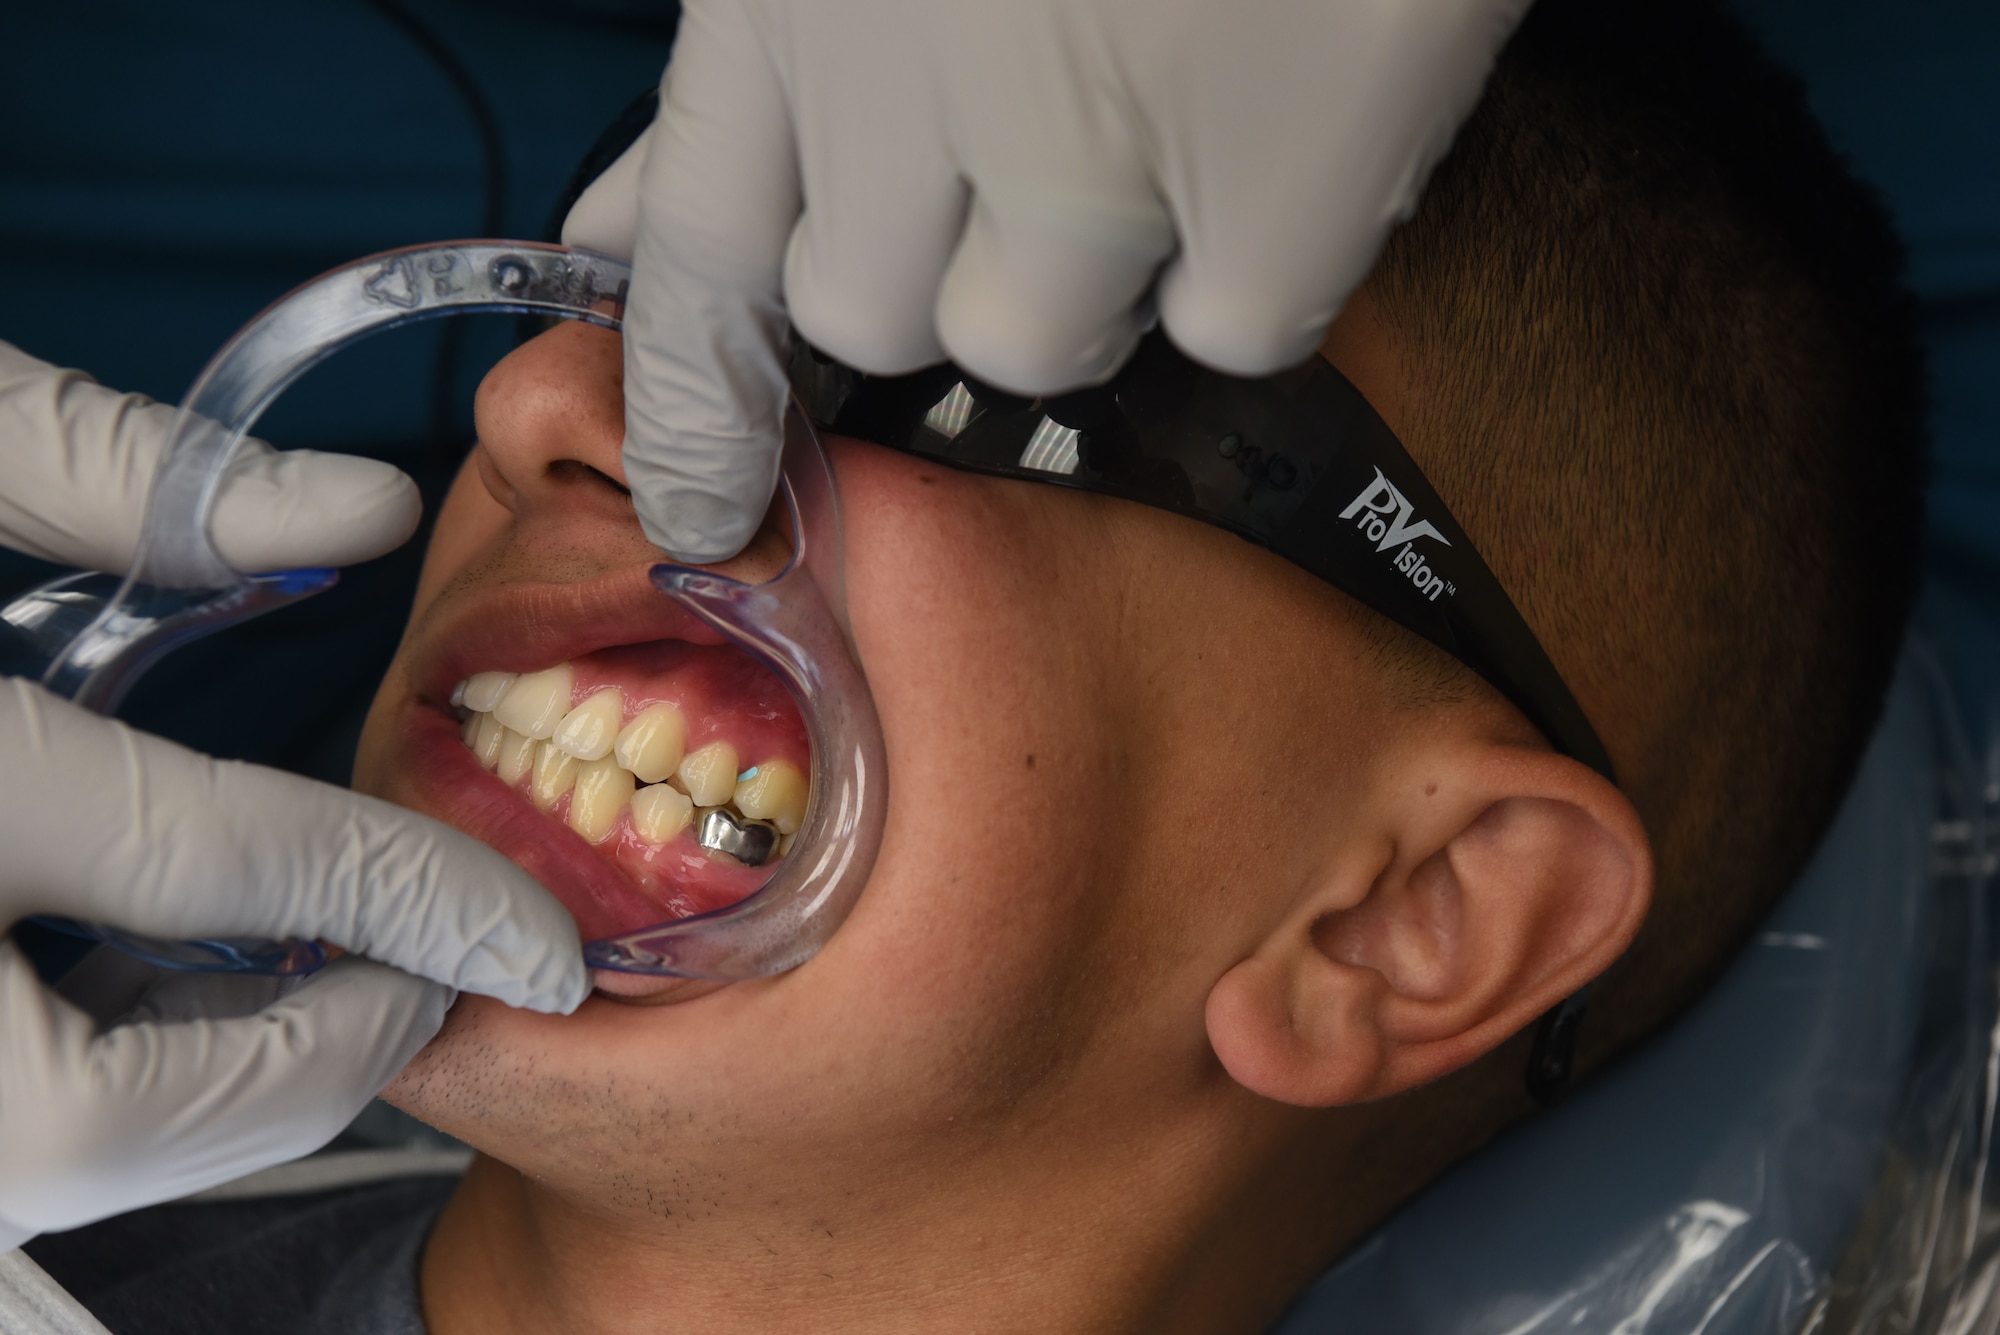 Captain Corey Cook, 90th Medical Group dentist, inspects the patients silver crown before starting the procedure of replacing the current crown with a reinforced porcelain crown at the dental clinic on F.E. Warren Air Force Base, Wyo., Dec. 19, 2017. The crown replacement provided a more natural looking tooth. The mission of the U.S. Air Force Dental Corps is to achieve superior oral health and global readiness through safe, effective and patient-centered care. (U.S. Air Force photo by Airman 1st Class Abbigayle Wagner)